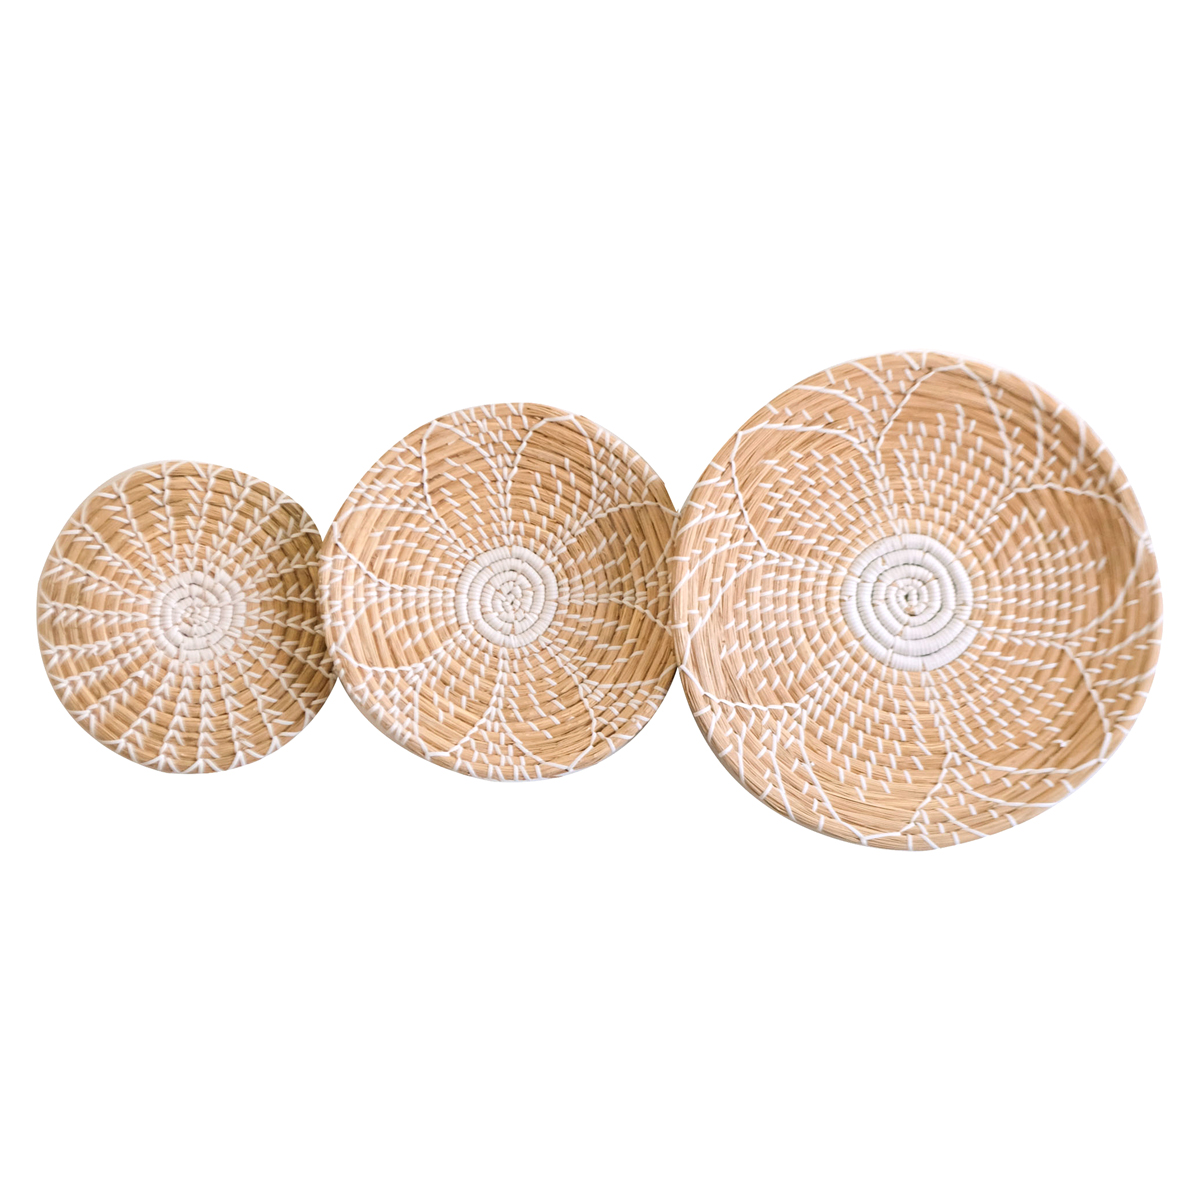 Seagrass Decorative Large Wall Hanging Basket Wall Art Set of 3